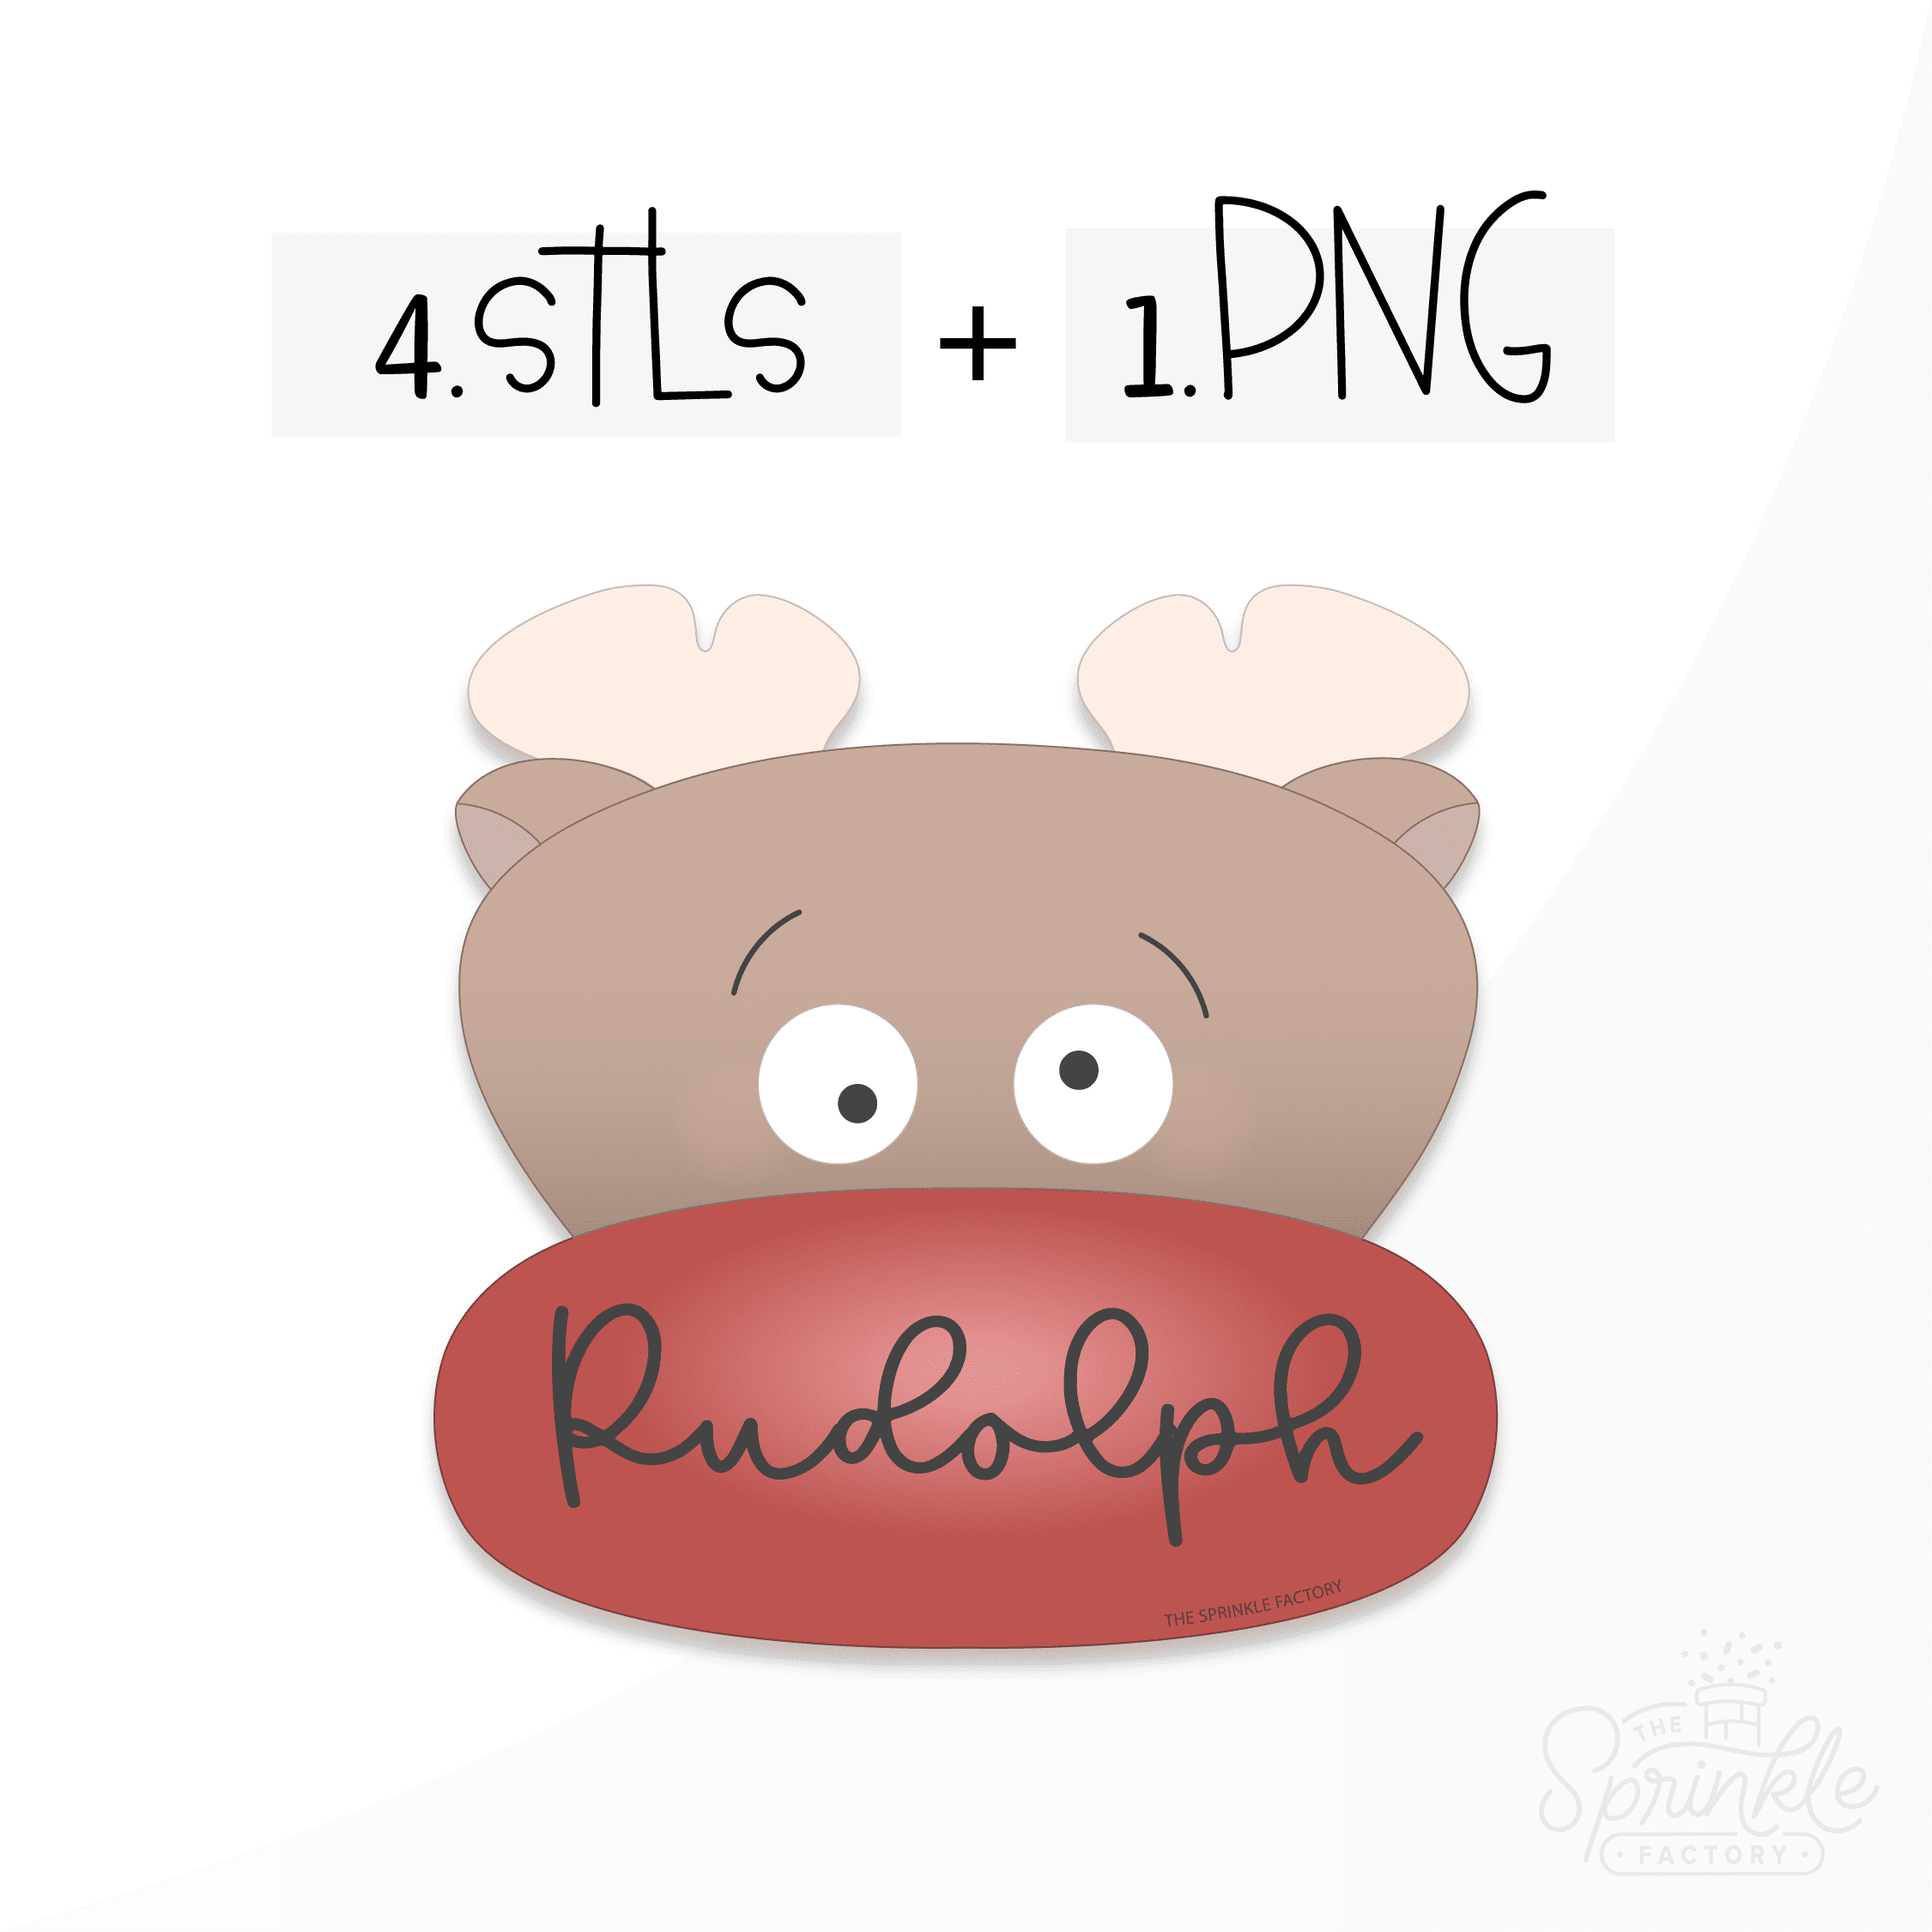 Clipart image of Rudolph with silly eyes and a large wide red nose with the word Rudolph on the nose.